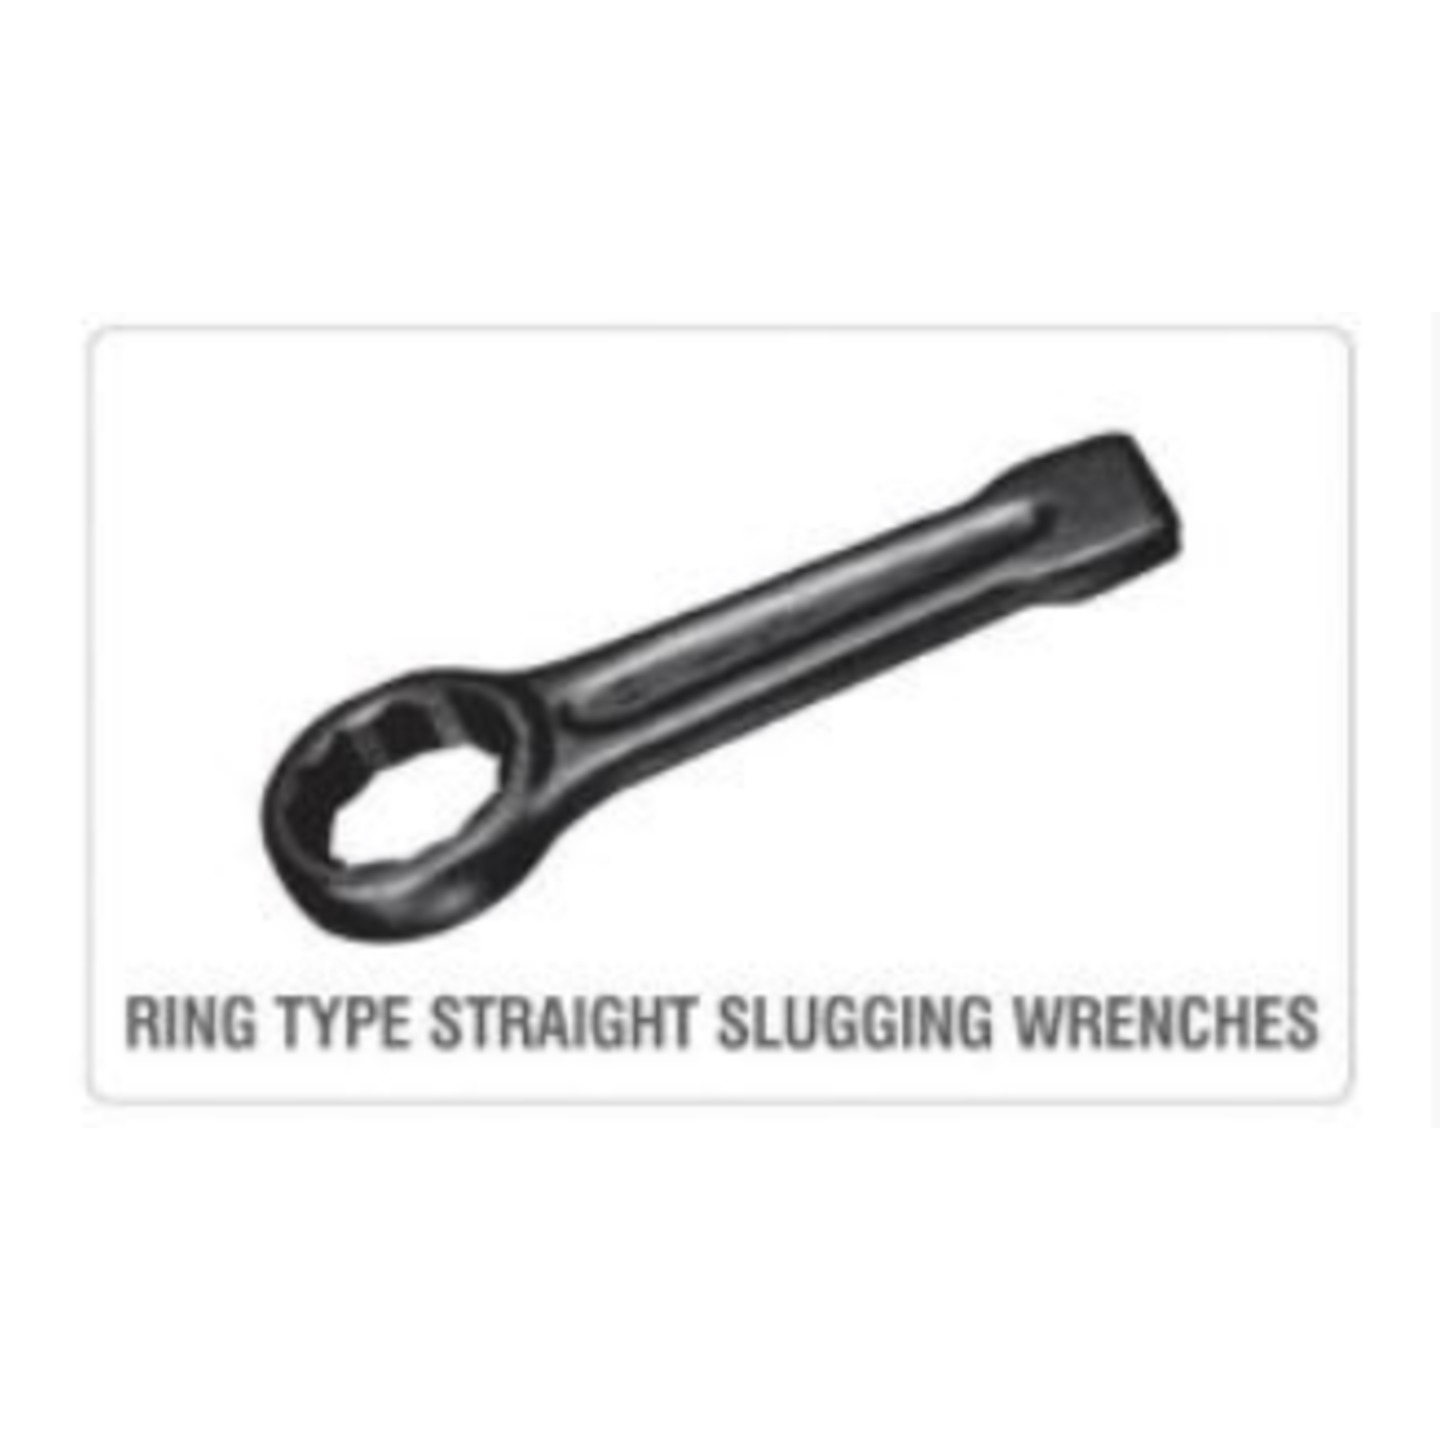 SLUGGING WRENCHES